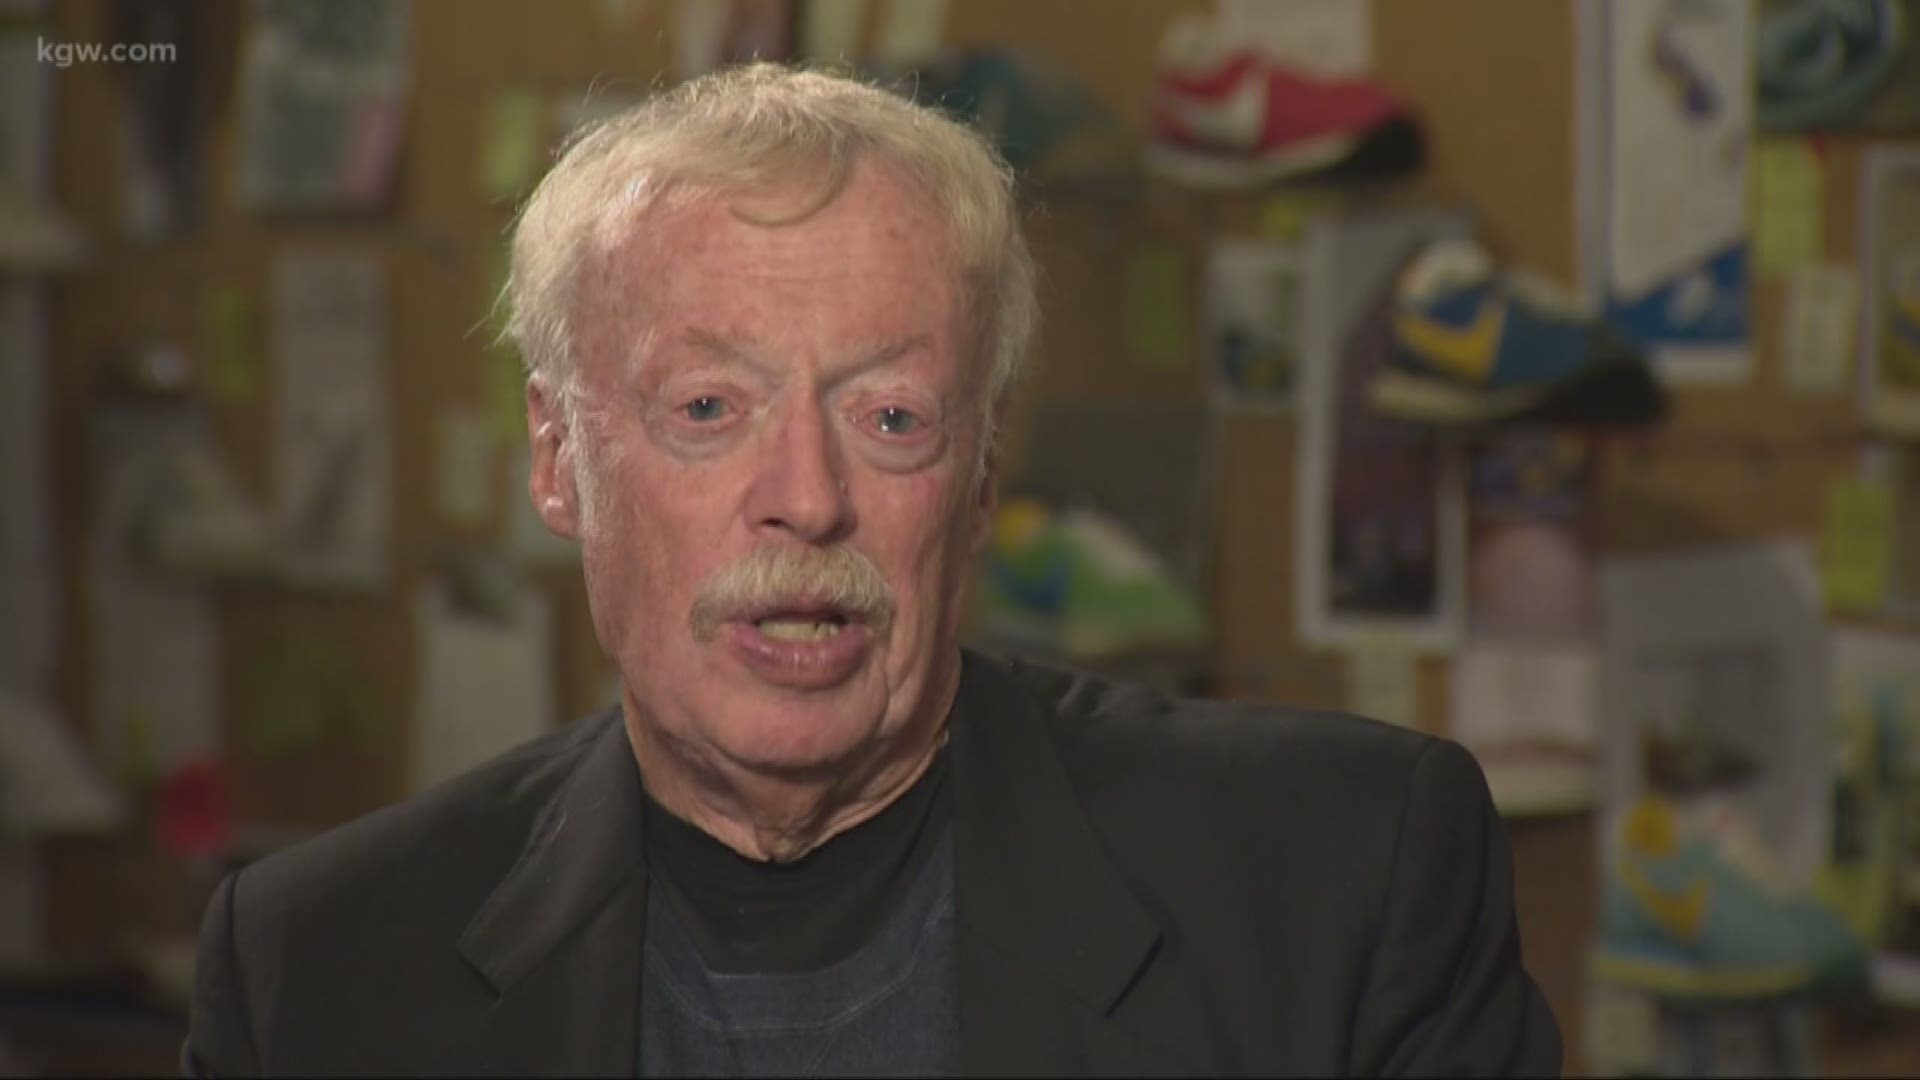 Phil Knight donated another million dollars to Knute Buehler's campaign.